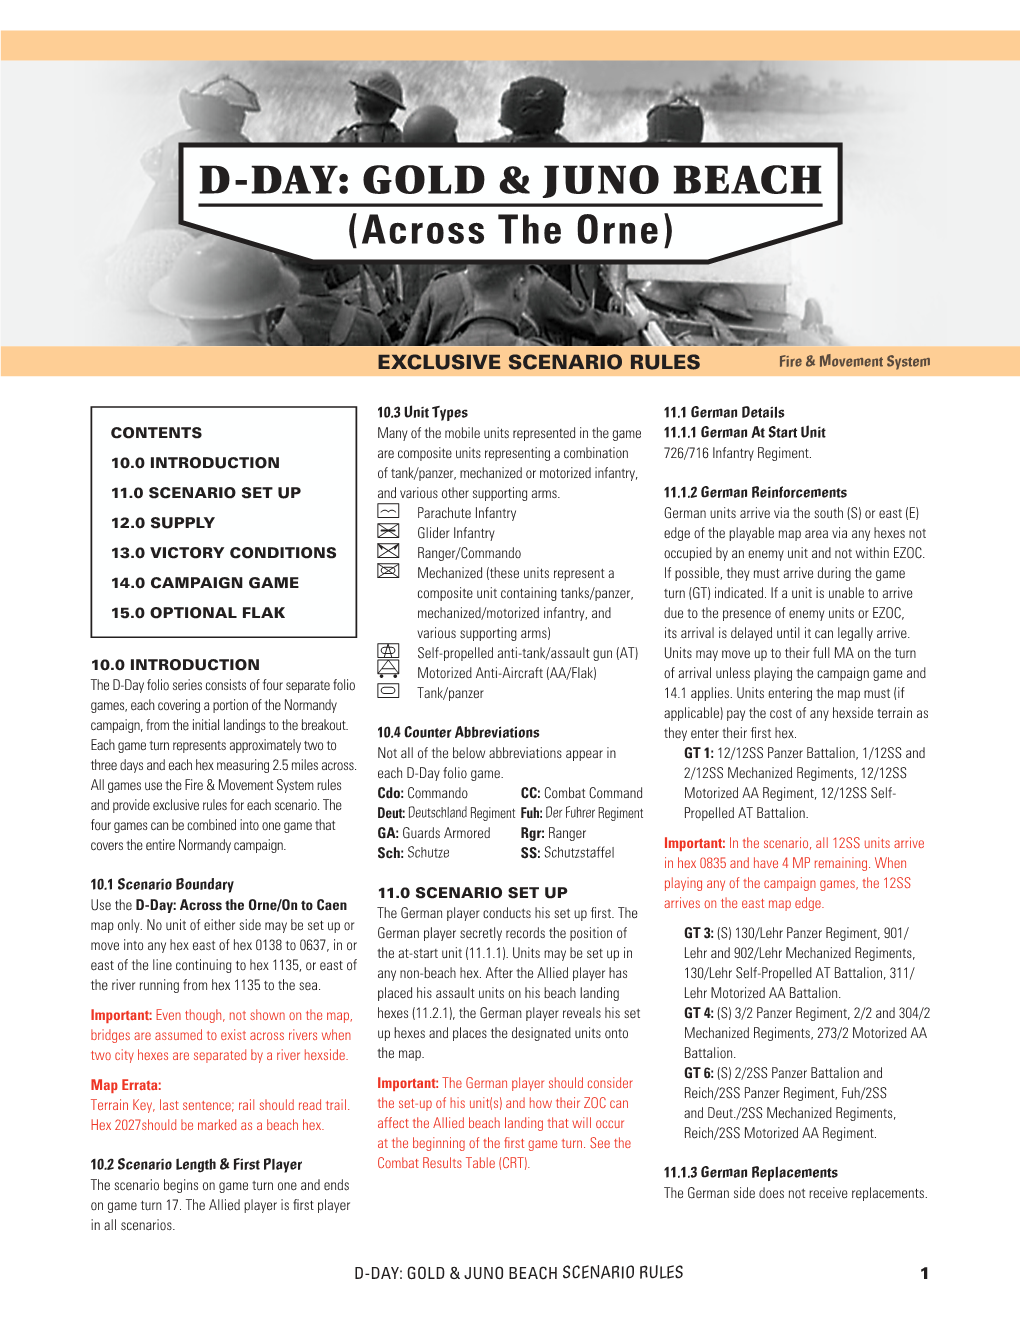 D-DAY: GOLD & JUNO BEACH (Across the Orne)